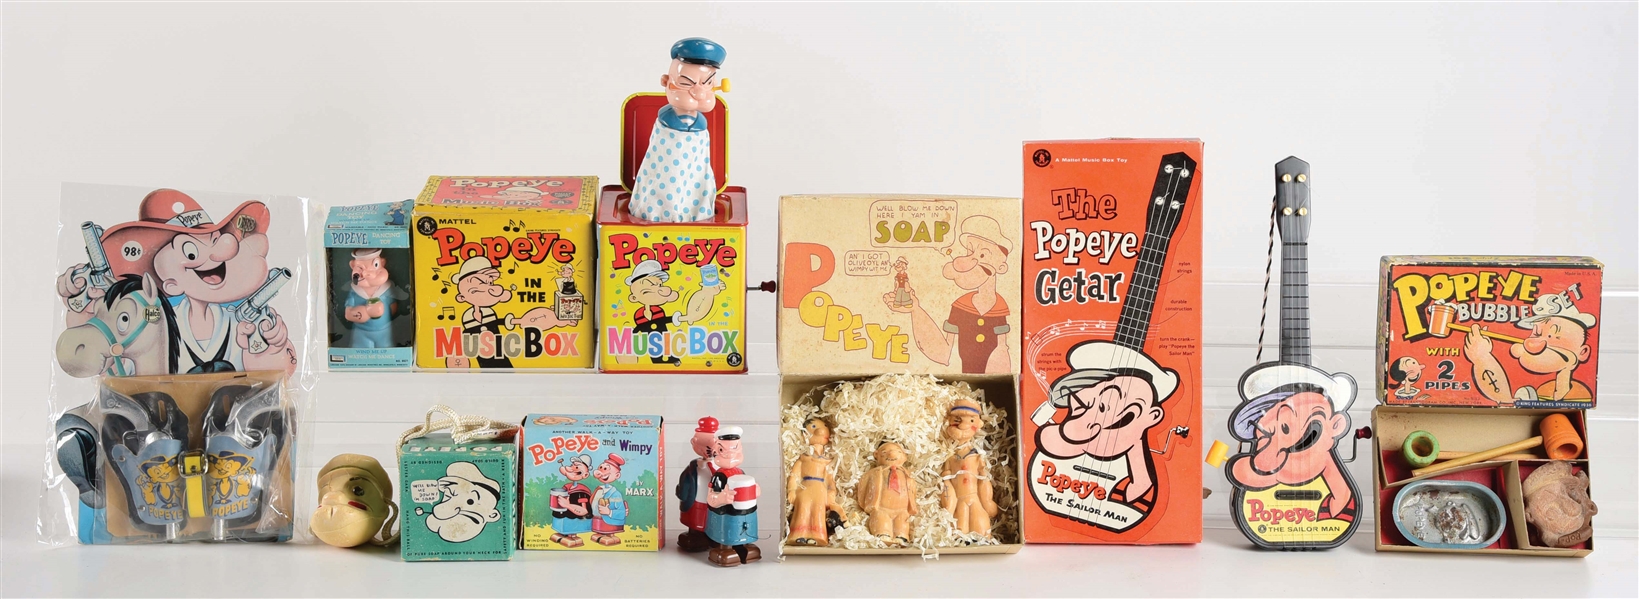 LOT OF 8: VARIOUS POPEYE TOYS AND MEMORIBILIA ITEMS.